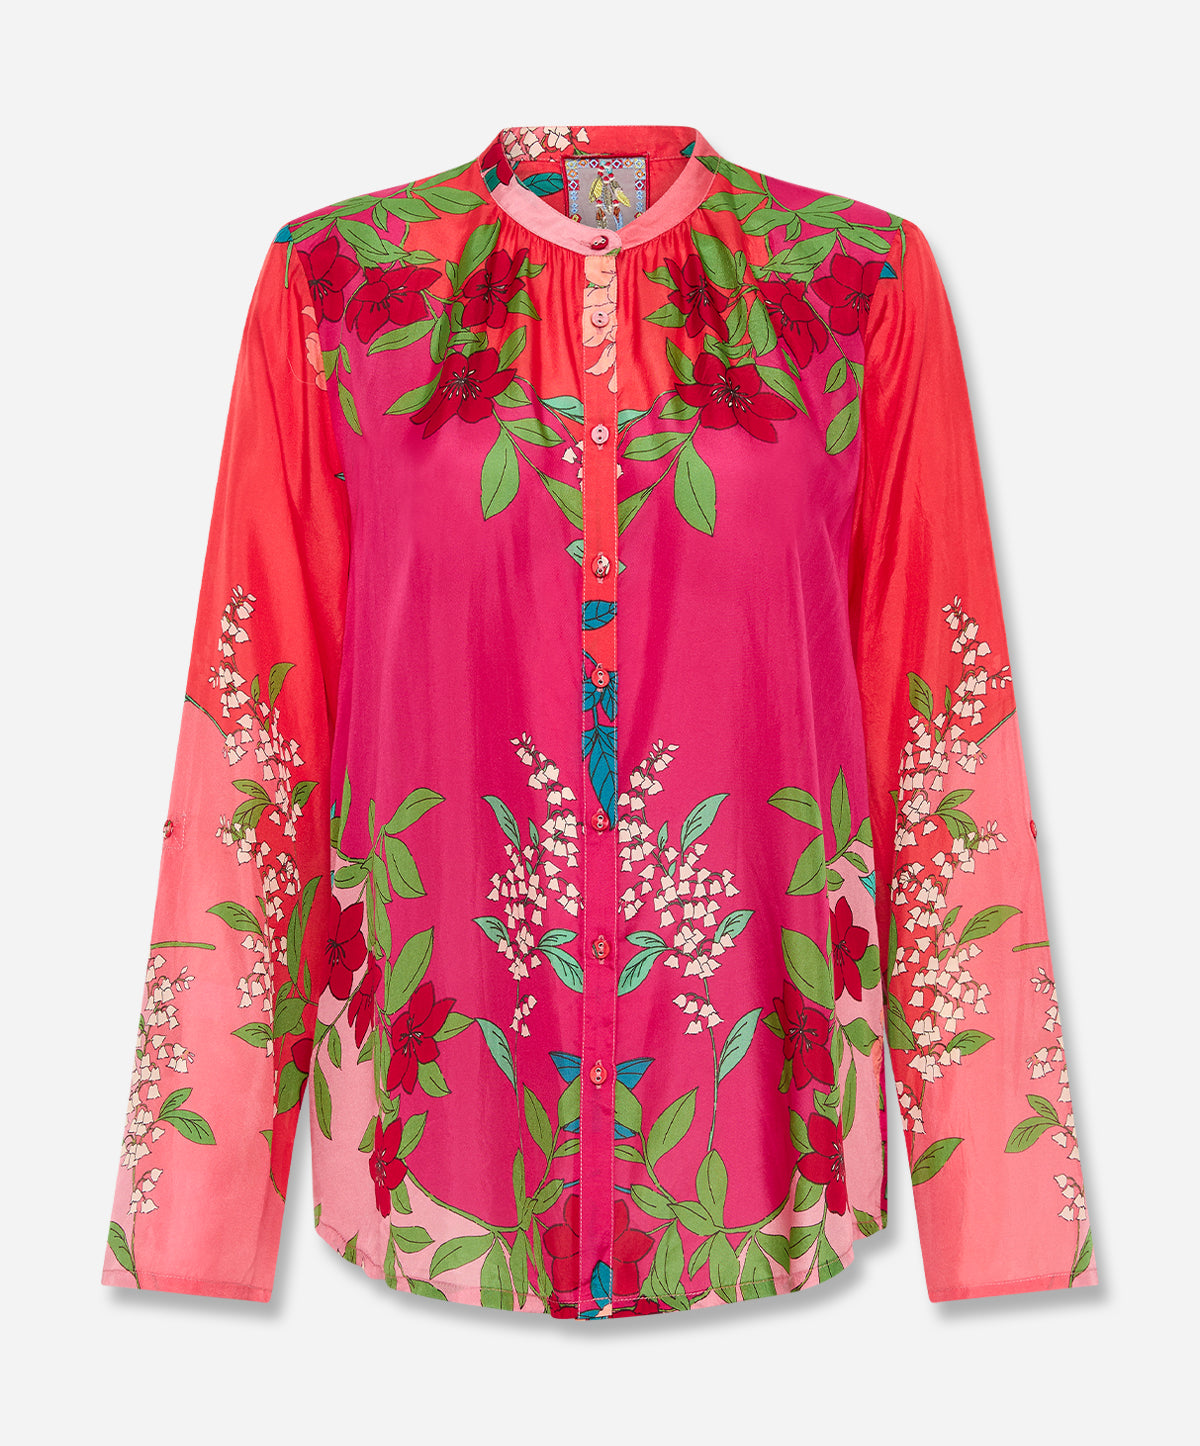 Nanya Flower Button Up (Exclusive)